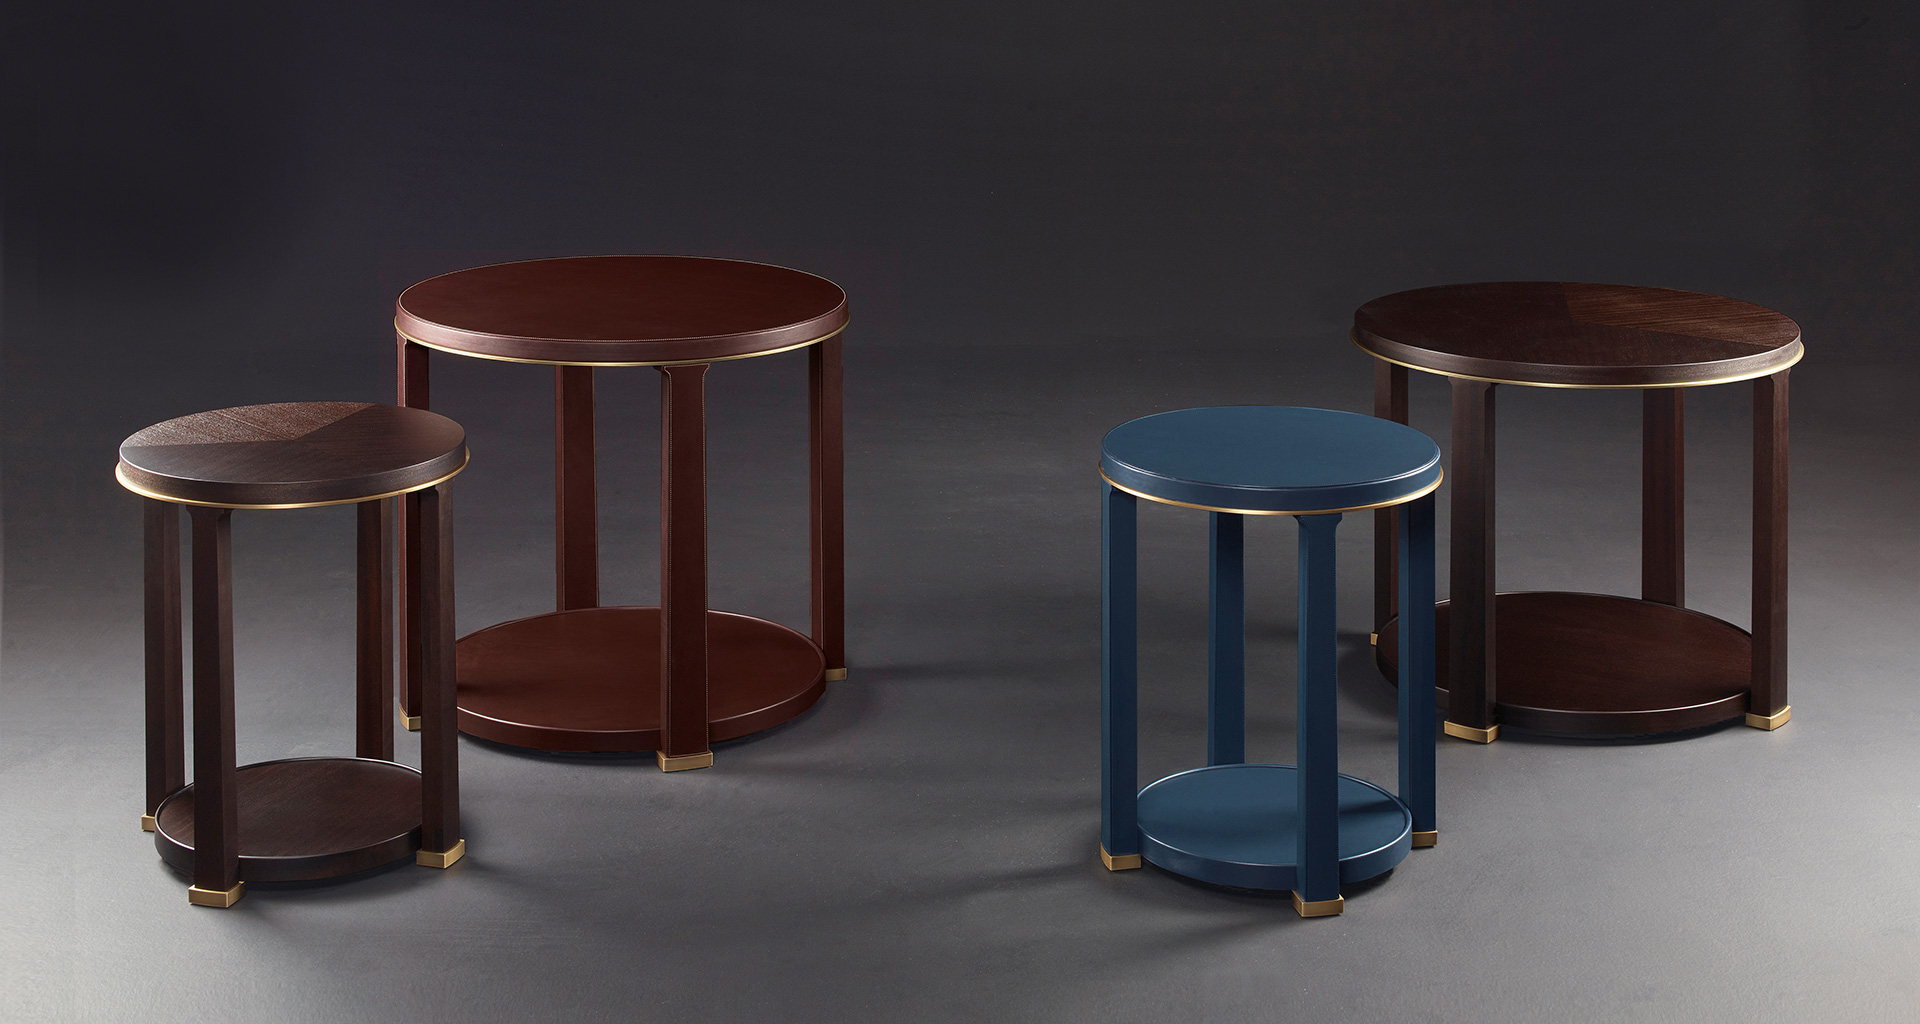 Momus is a wooden small table and gueridon with bronze base and profile, from Promemoria's Night Tales collection | Promemoria